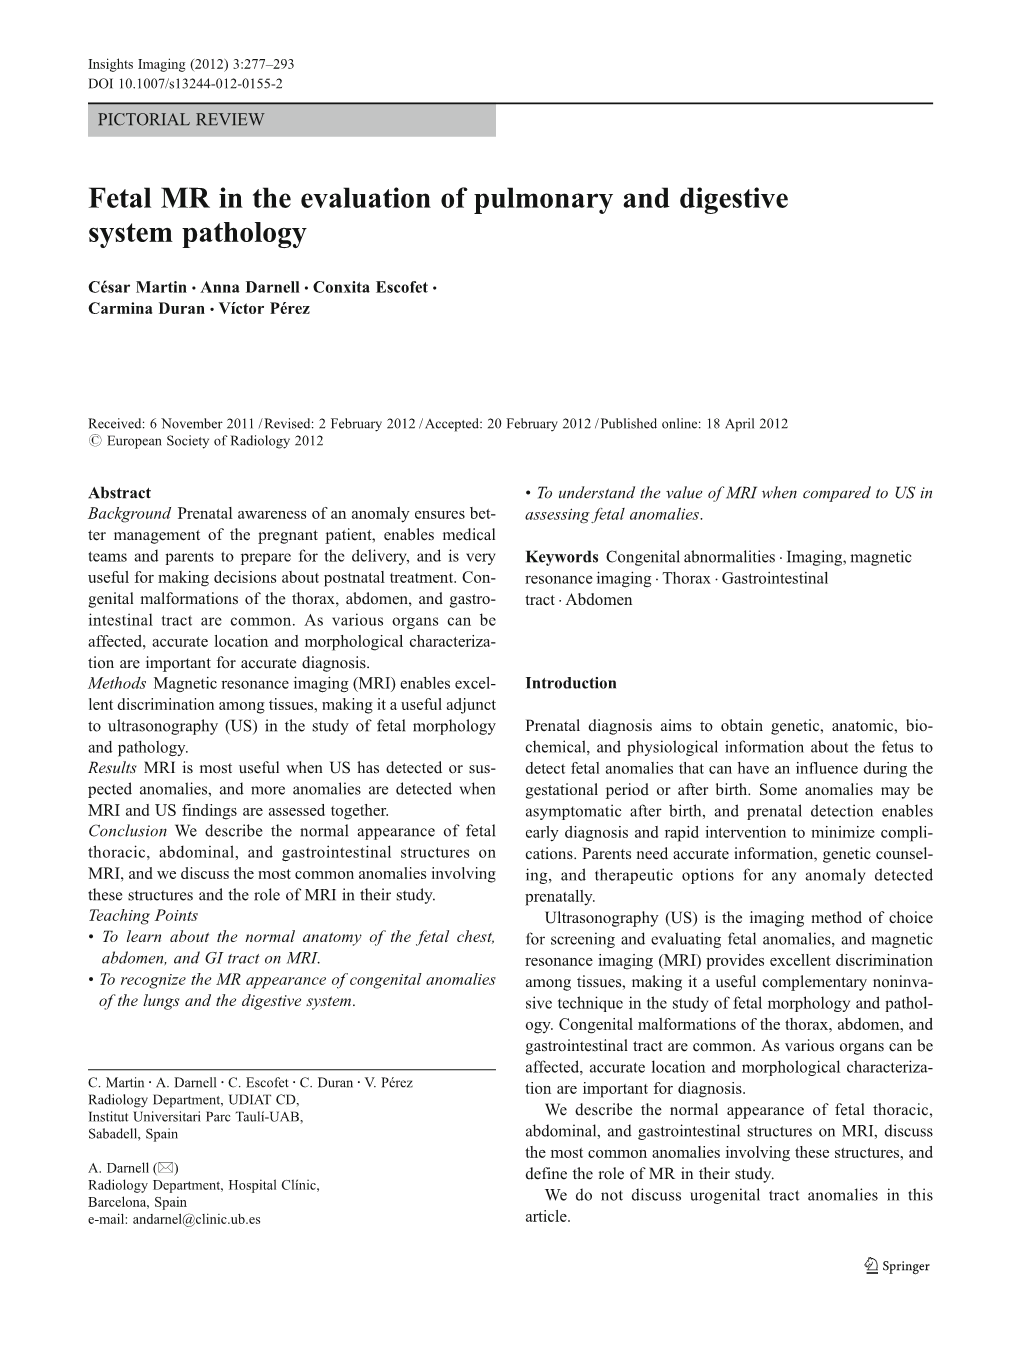 Fetal MR in the Evaluation of Pulmonary and Digestive System Pathology